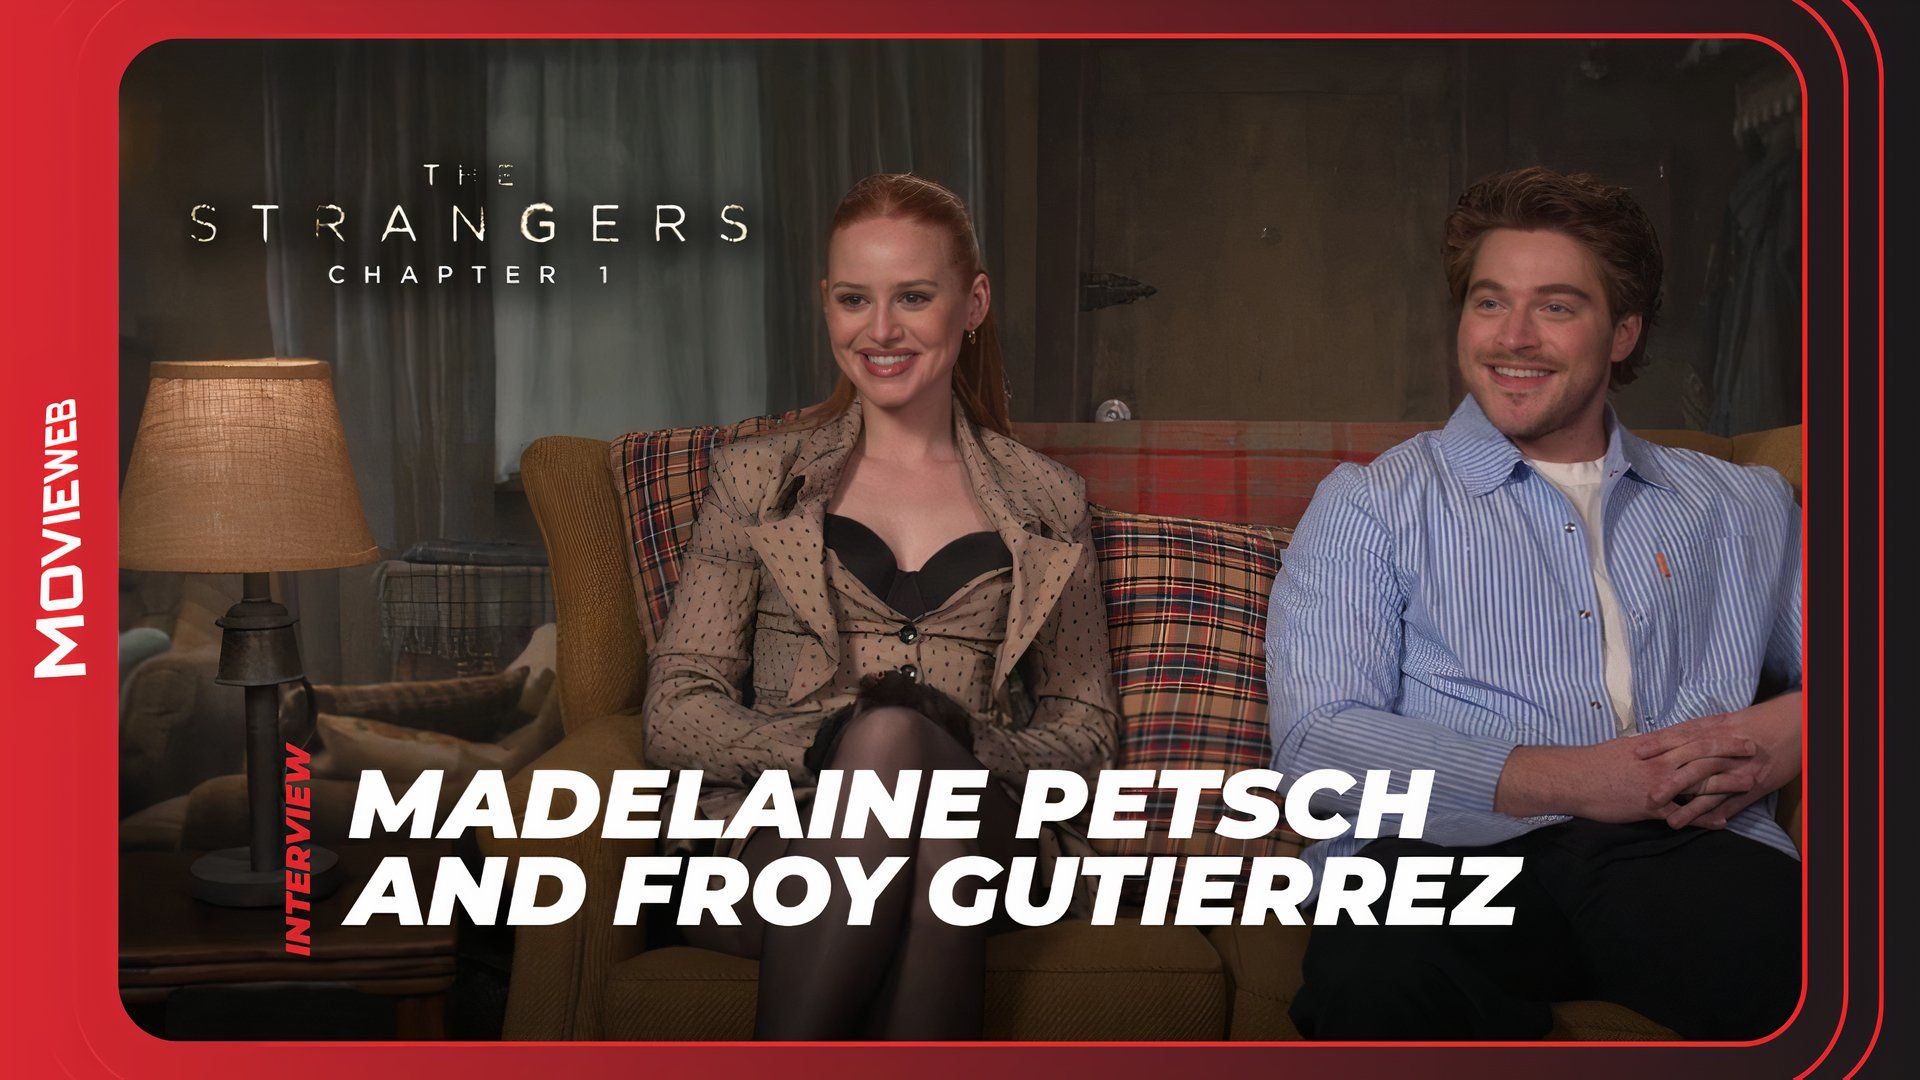 The Strangers- Chapter 1 - Madelaine Petsch and Froy Gutierrez Interview